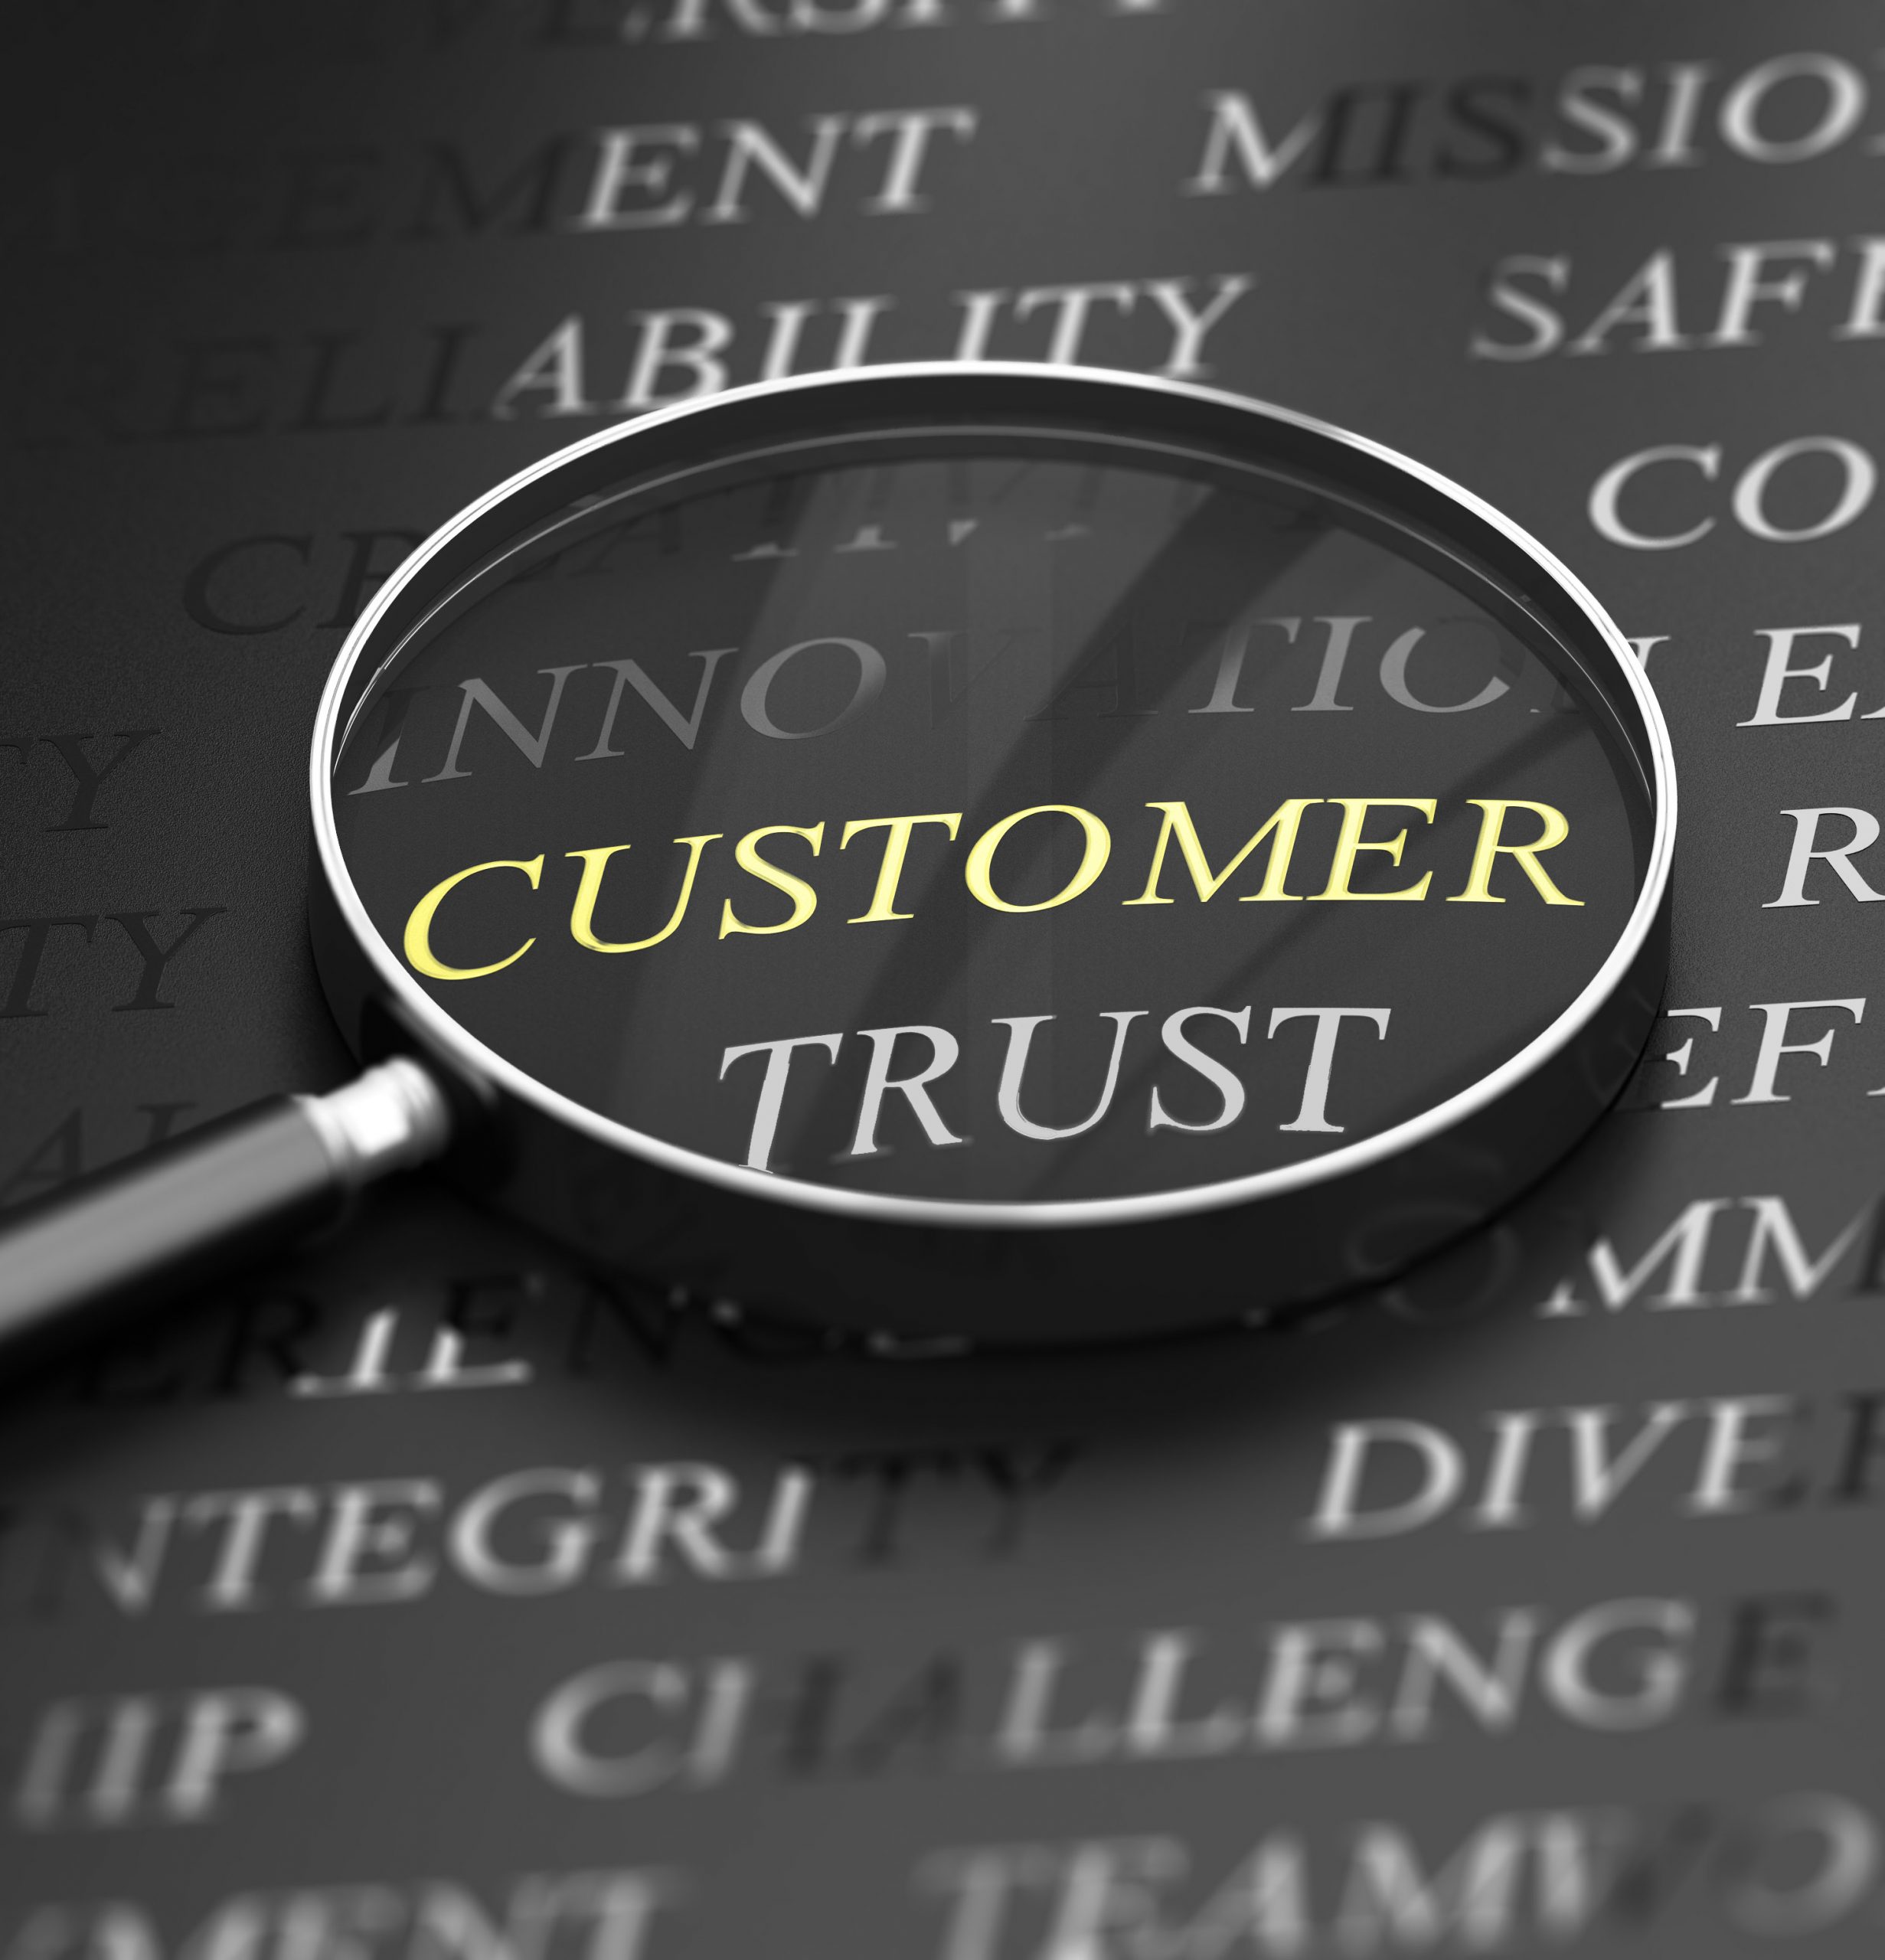 Building trust in customer relationships is very important for repeat business